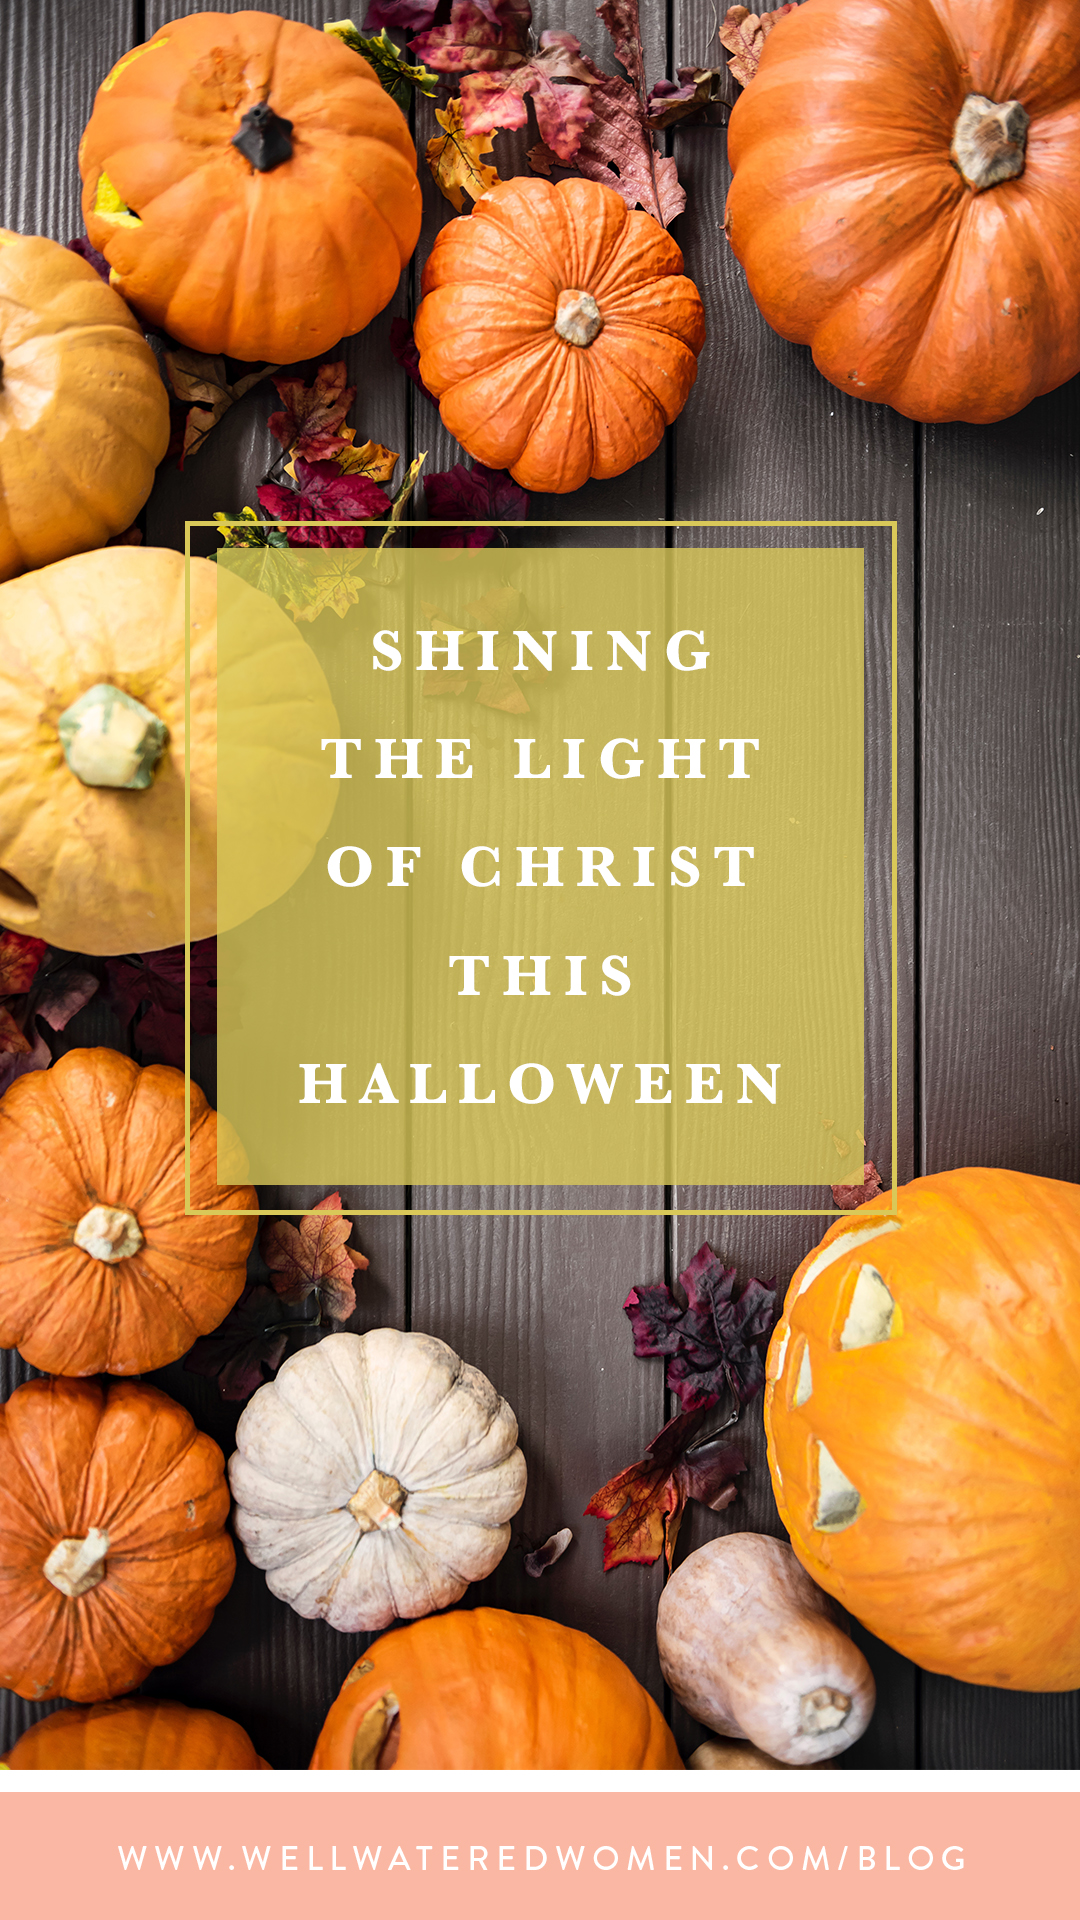 Shining the Light of Christ This Halloween: When we choose to instead close our doors and turn off the lights, we miss the one night of the year where our neighbors are coming to us! How often do we invite people to church or to our home for a gathering only to be rejected? What a wonderful opportunity to say “yes!” on Halloween night when they come straight to our doors. This time of year is the beginning of cooler weather, festive gatherings, and togetherness. It offers us the opportunity to reach out to our neighbors and friends in creative ways.